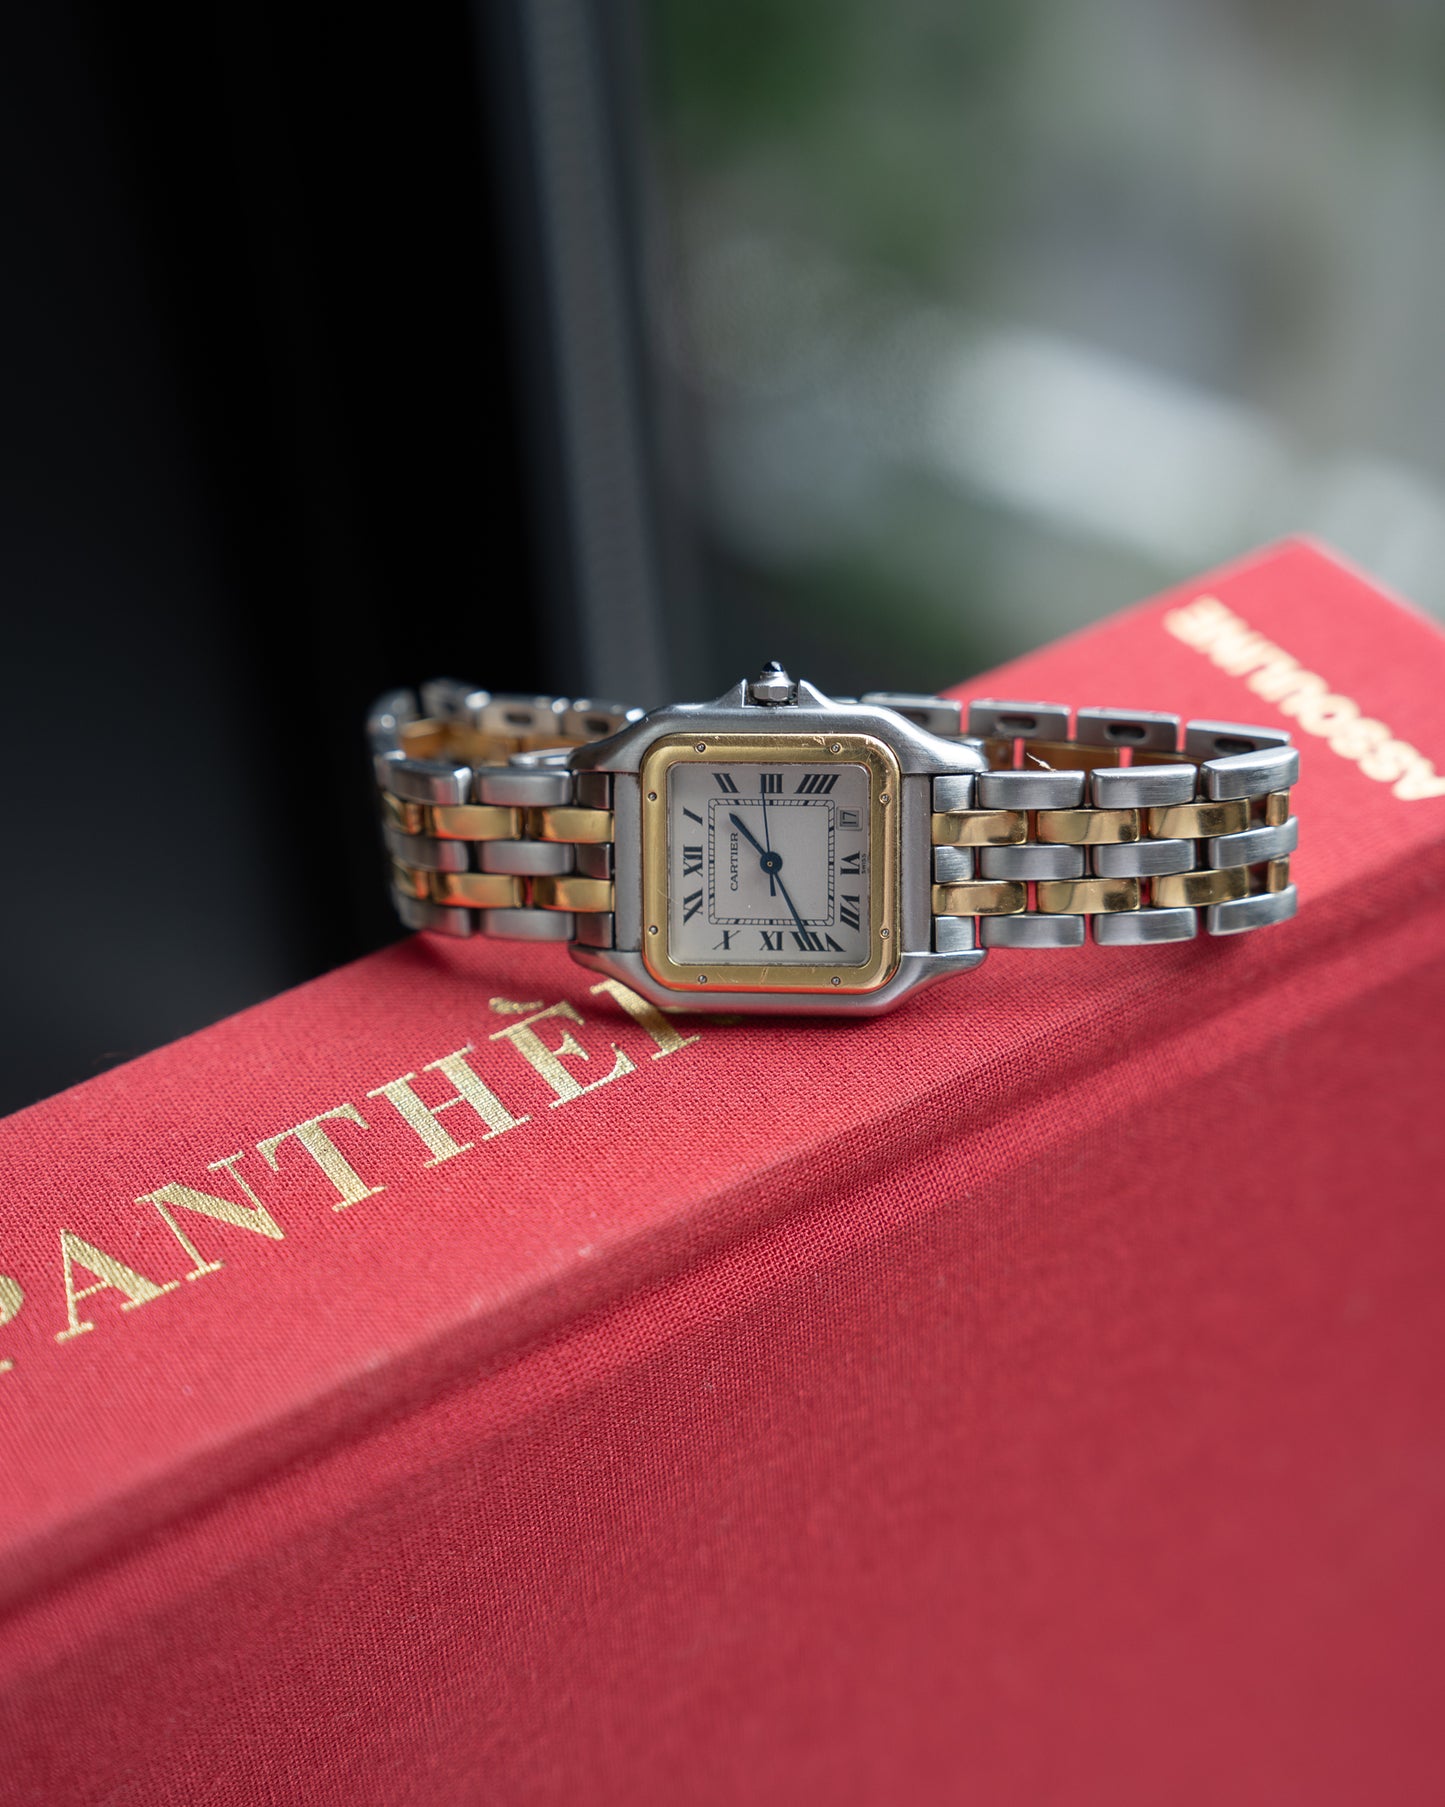 Cartier Panthere MM in steel & gold ref. 1100, box & papers